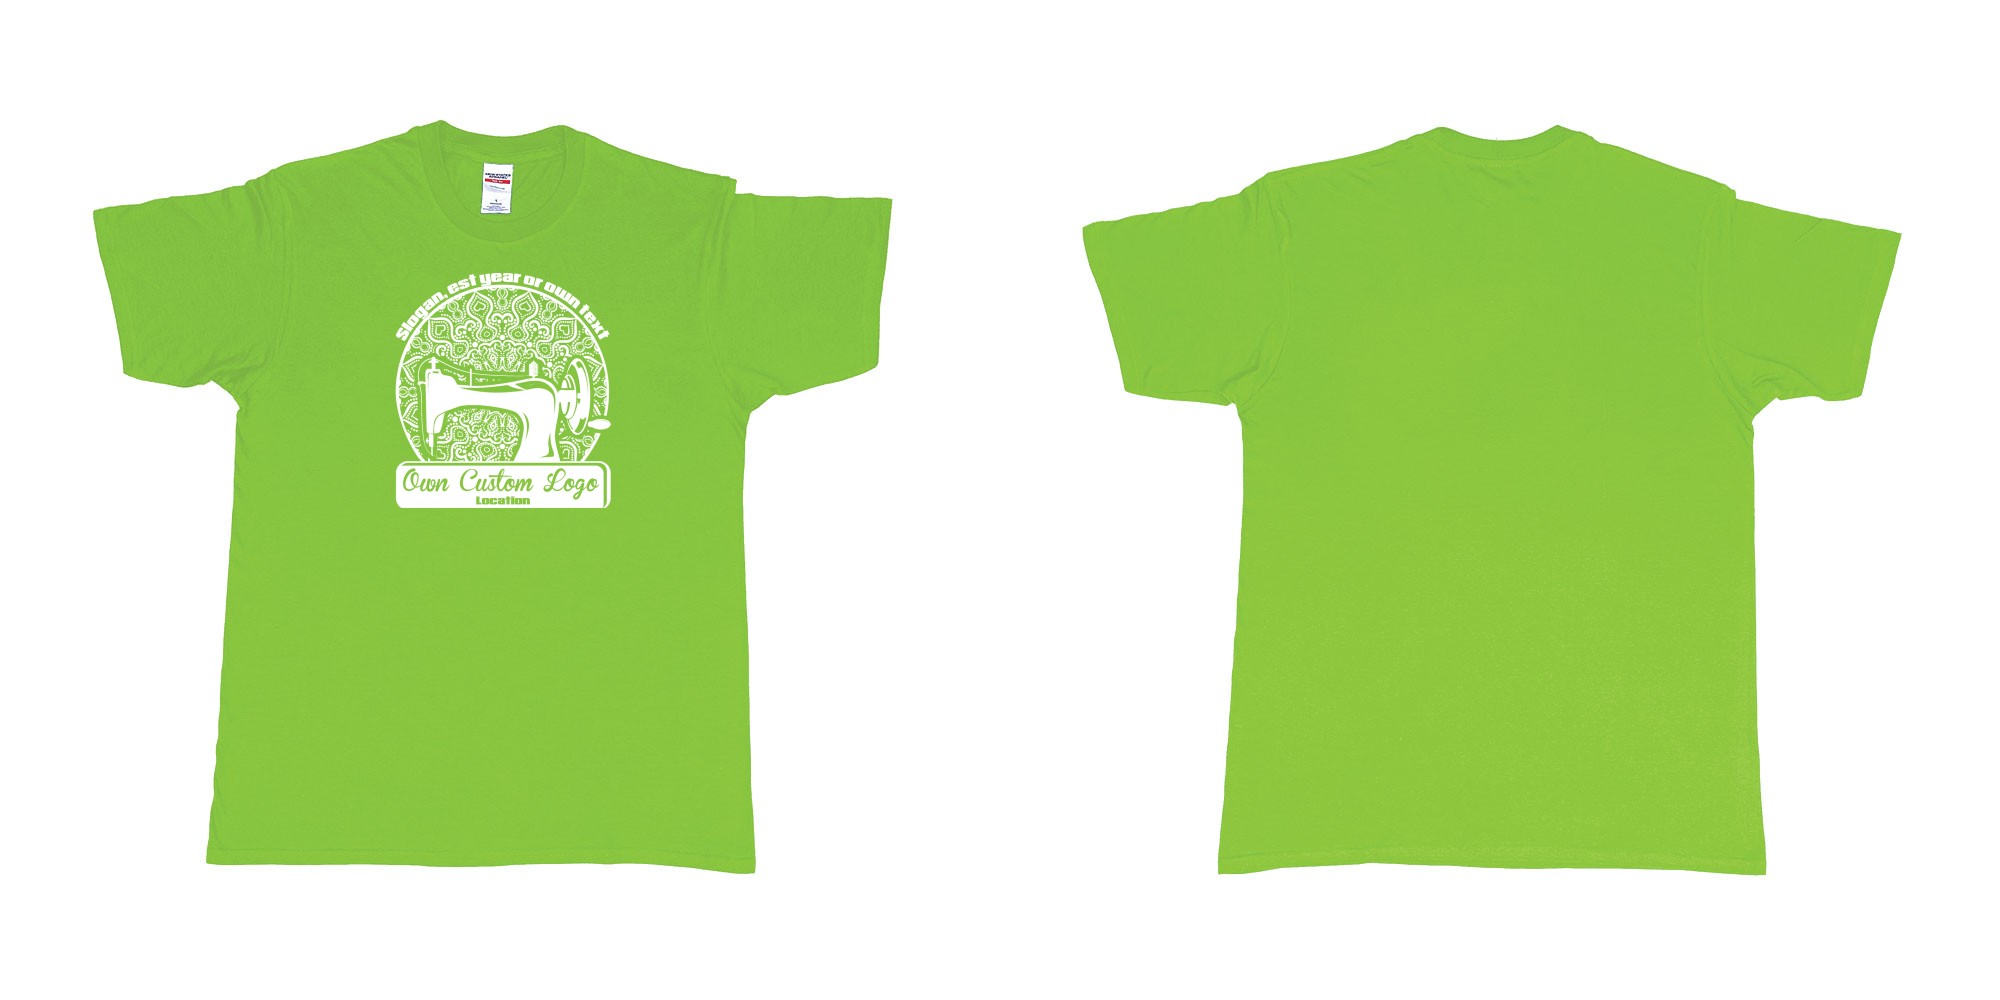 Custom tshirt design sewing machine in fabric color lime choice your own text made in Bali by The Pirate Way